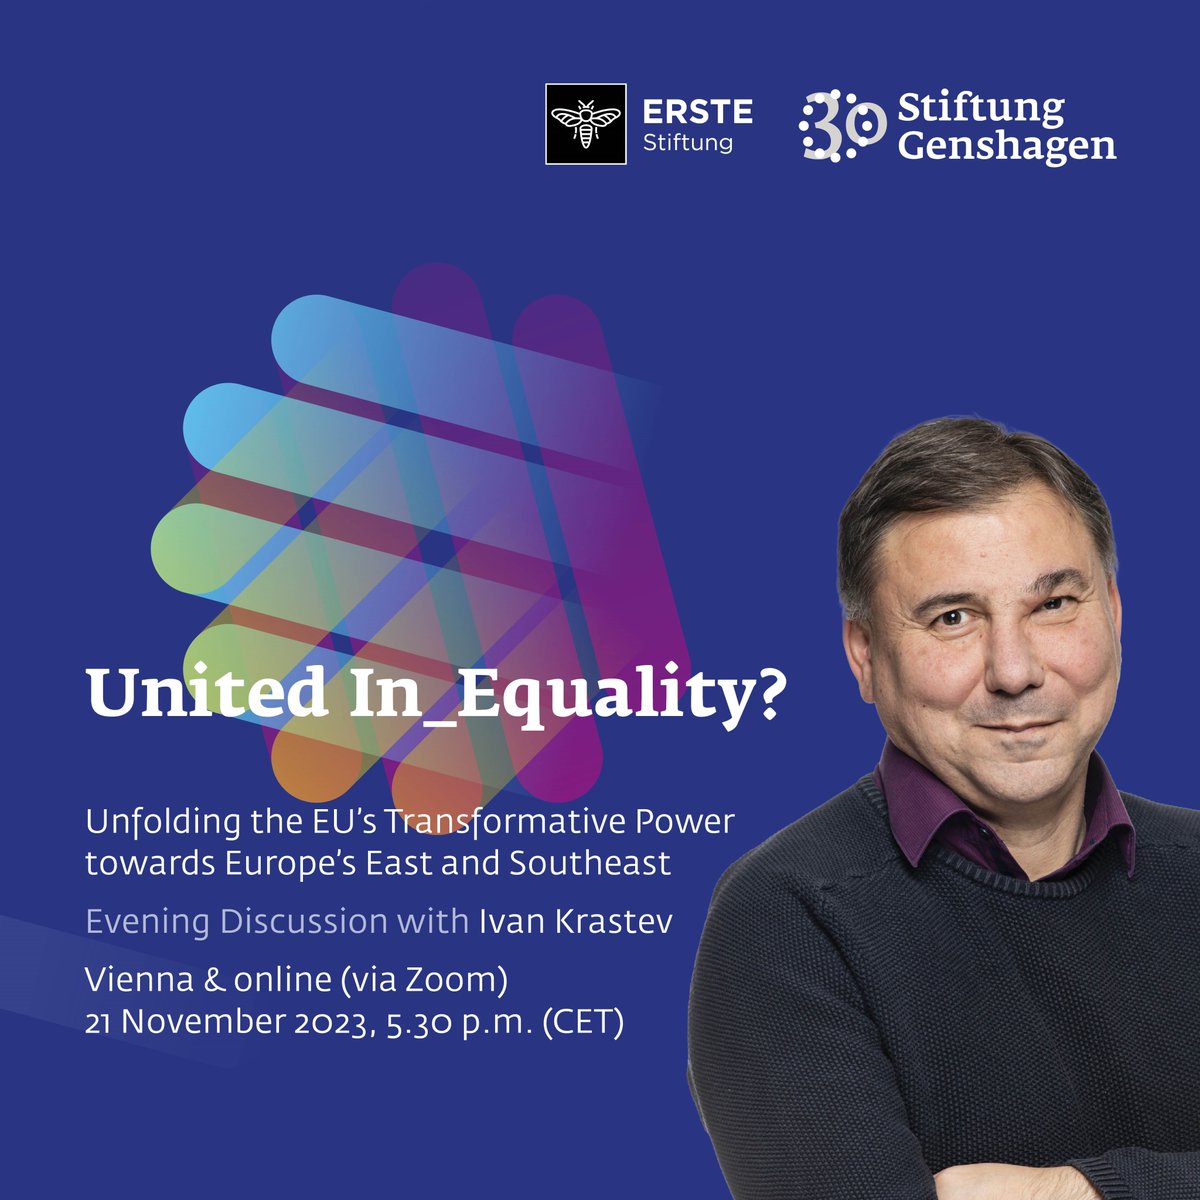 📣Together with @erstefoundation we invite you to a Discussion with political scientist #IvanKrastev: 'United In_Equality? Unfolding the #EU’s Transformative Power towards #Europe’s East and Southeast'.
🗓️Vienna & online, 21 Nov, 5.30 p.m.
👉bit.ly/eu-in-eq
#EUmeetsEurope